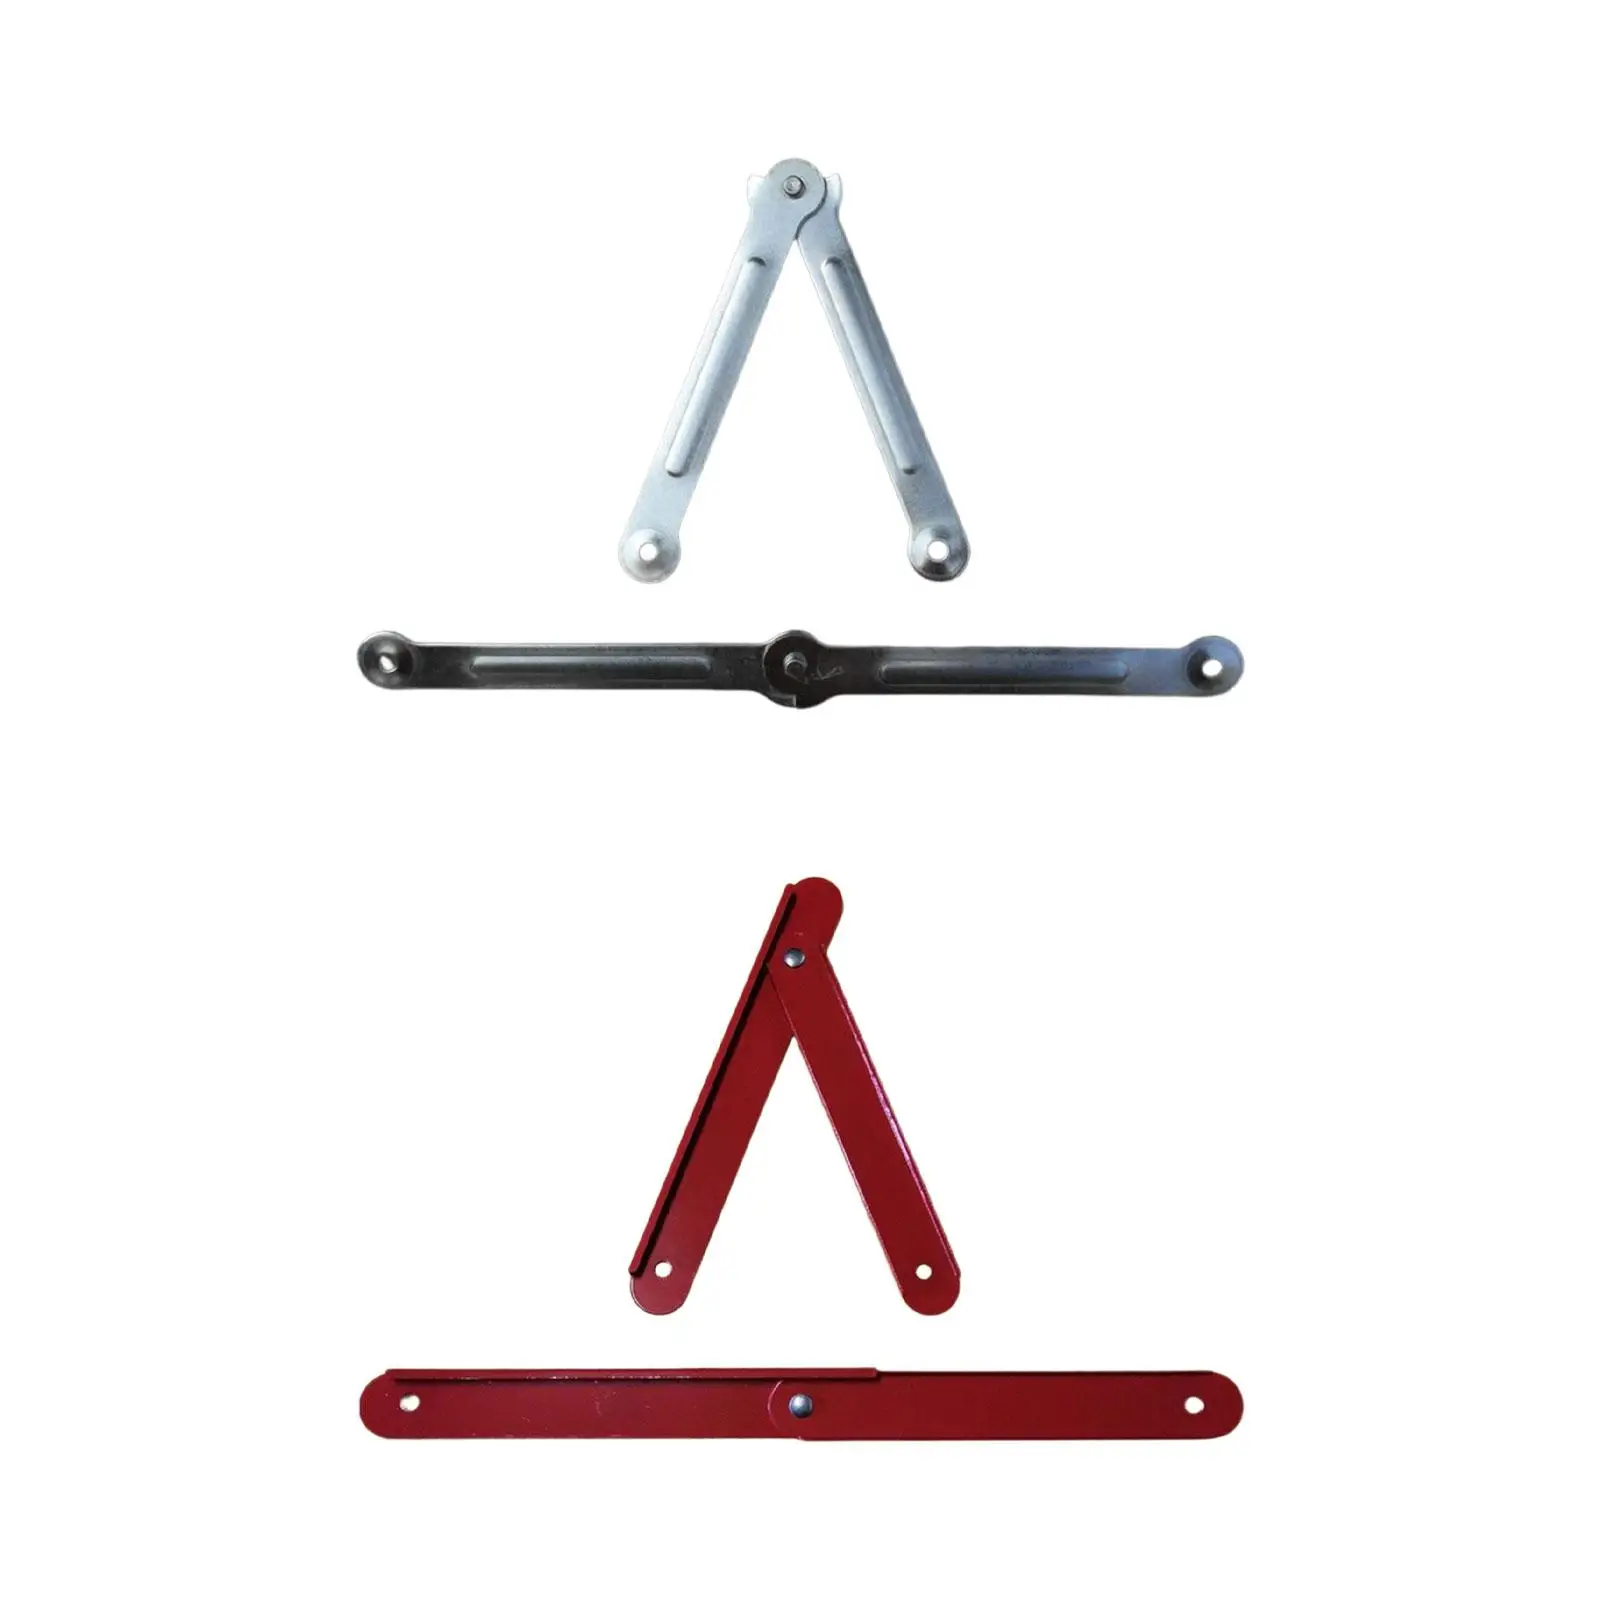 2x Replacement Ladder Rod Metal Bracket Attachment with Screw Stepladders Tie Rod Fixed Support Folding Step Ladder Hinge